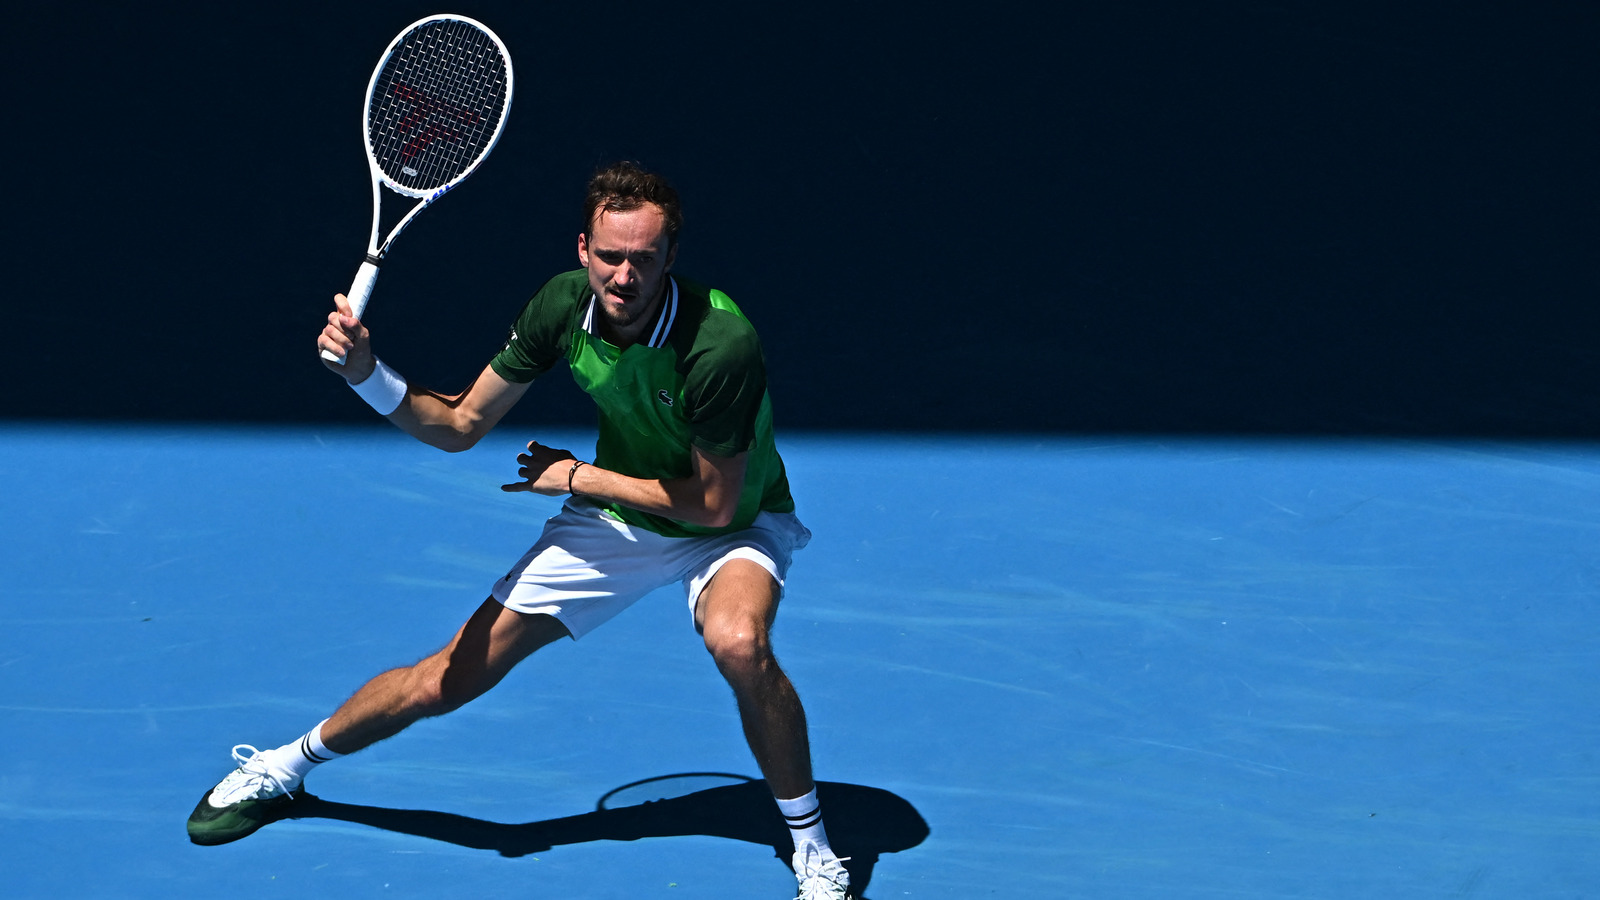 Daniil Medvedev overcomes ‘brutal conditions’ to advance to Australian Open second round